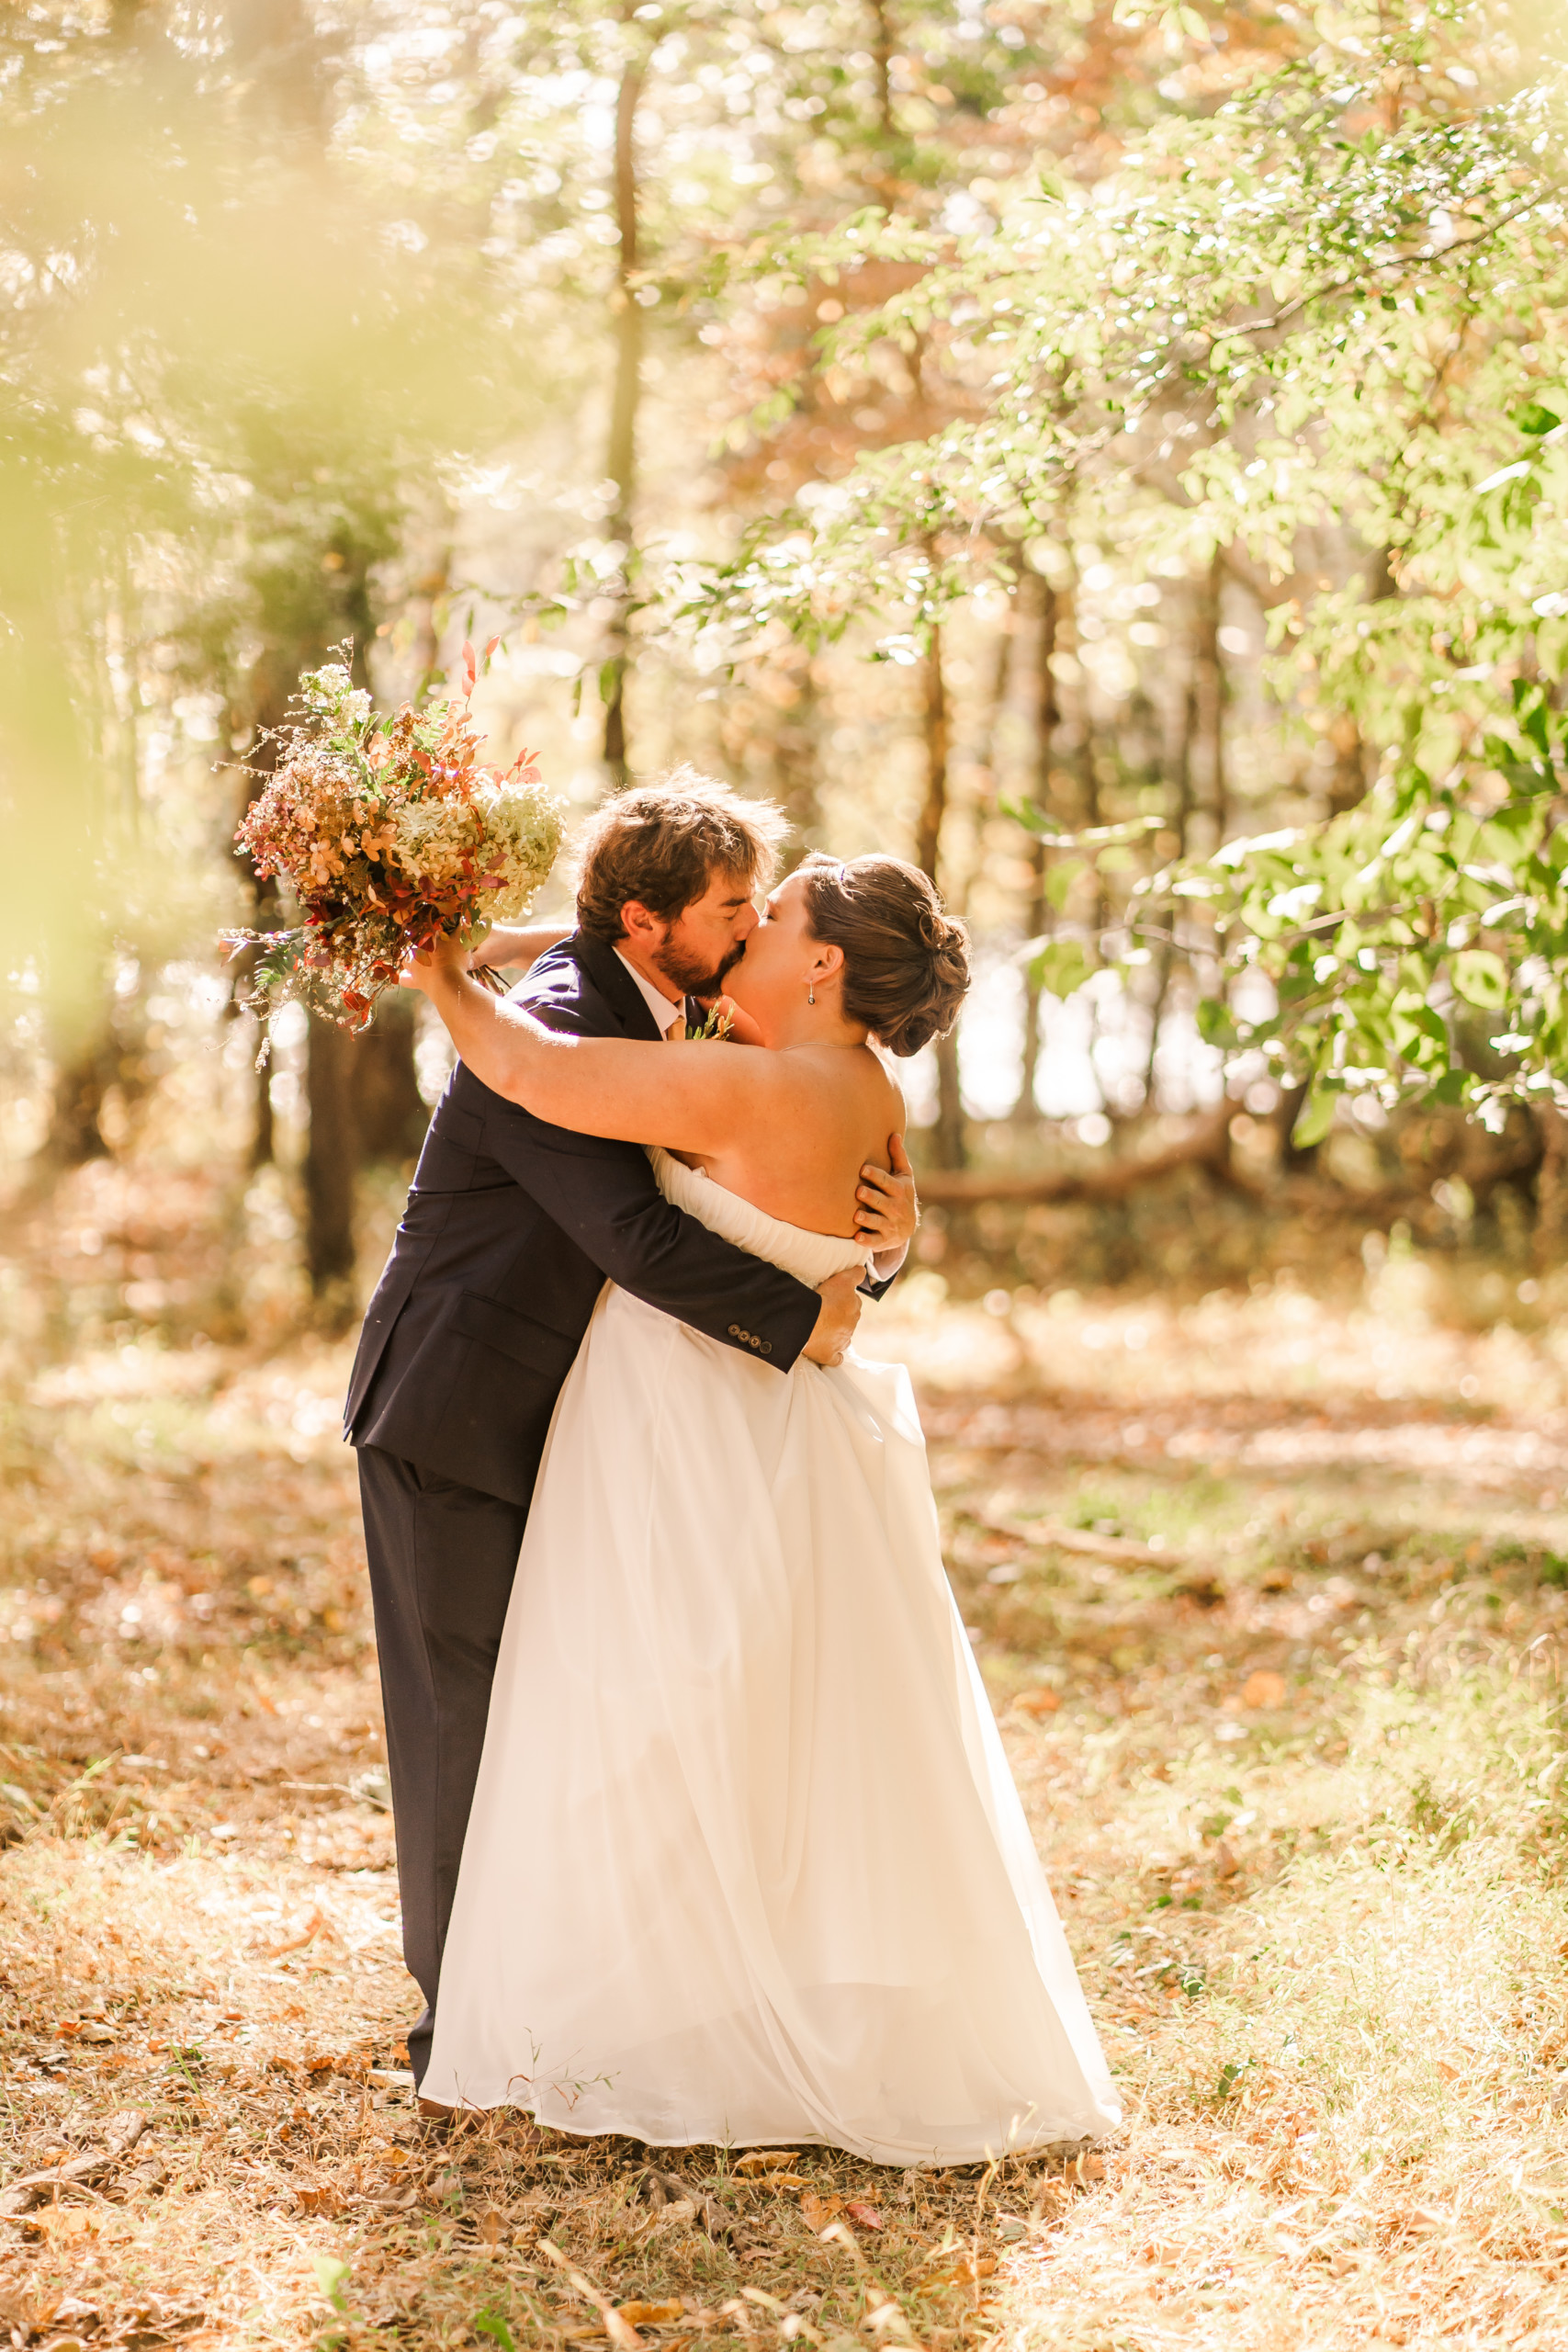 A Kissing Couple A Tennessee Wedding